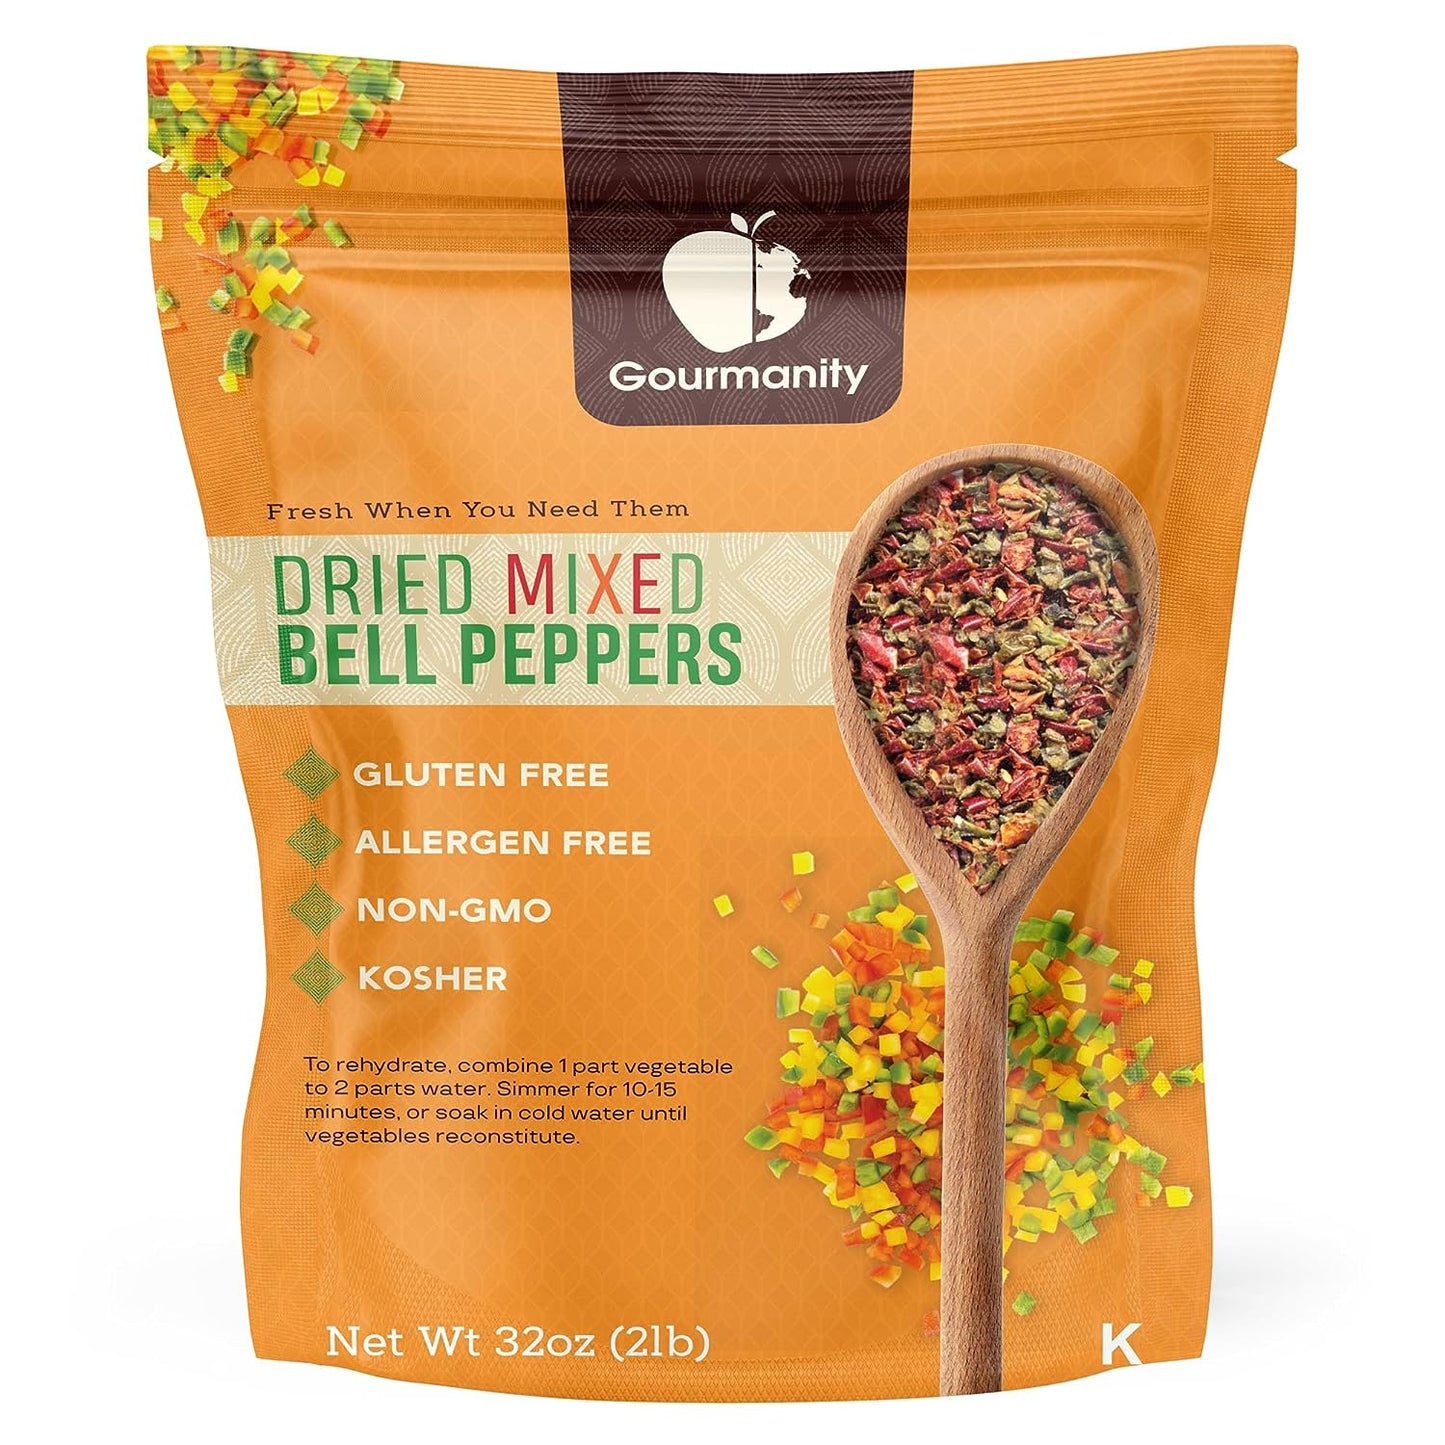 Gourmanity Dehydrated Mixed Bell Peppers 2lb - Gourmanity